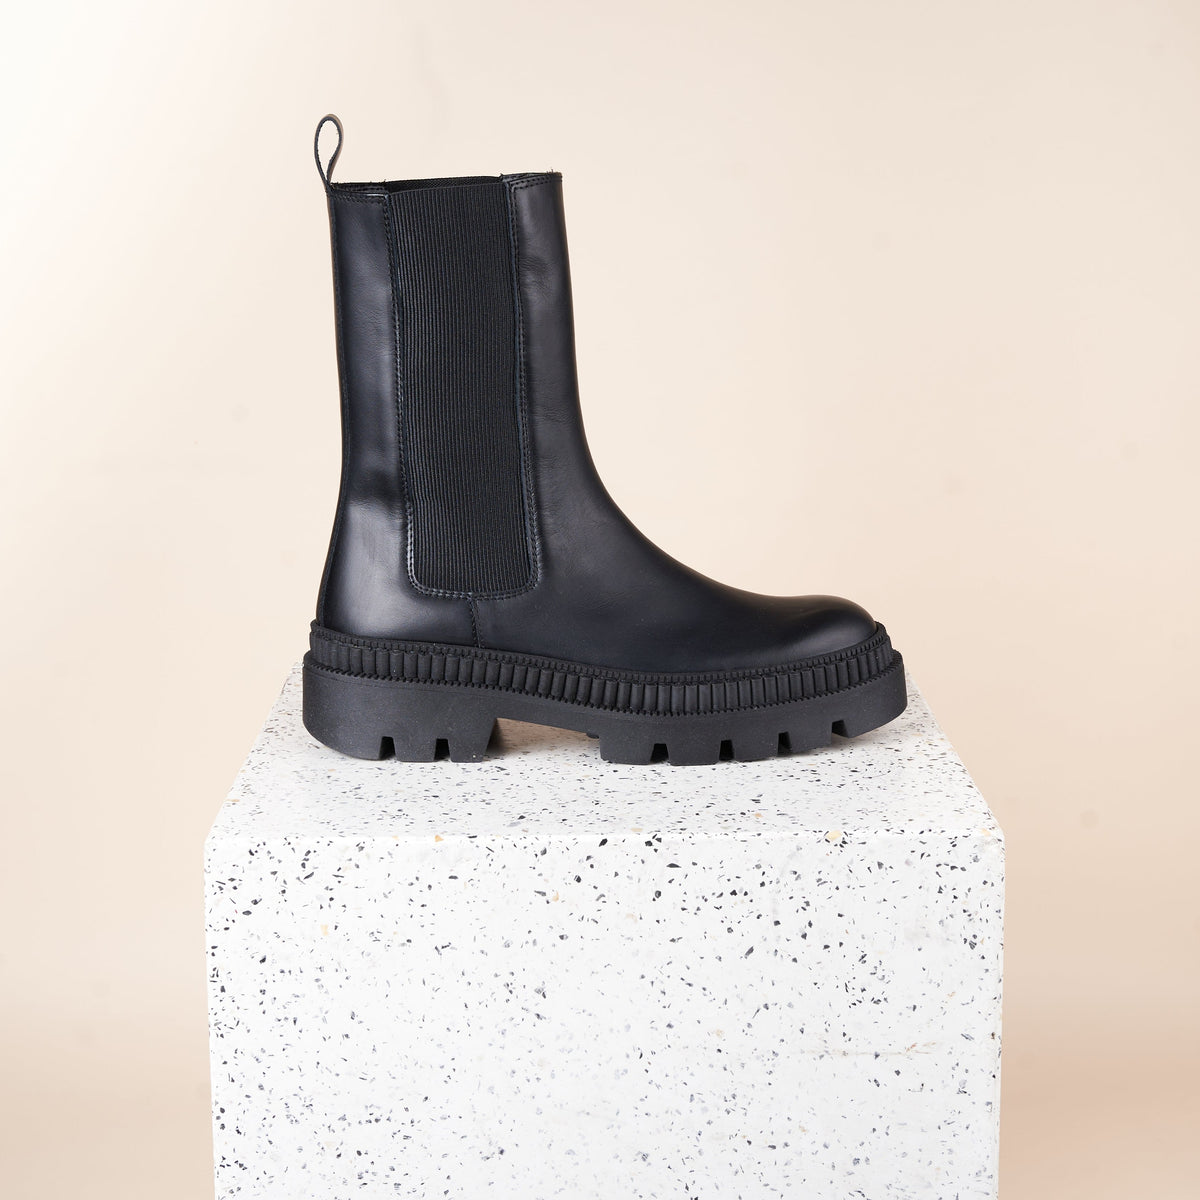 Monza Tall - Black Calf Leather/Black (Final sale with code BFCM)